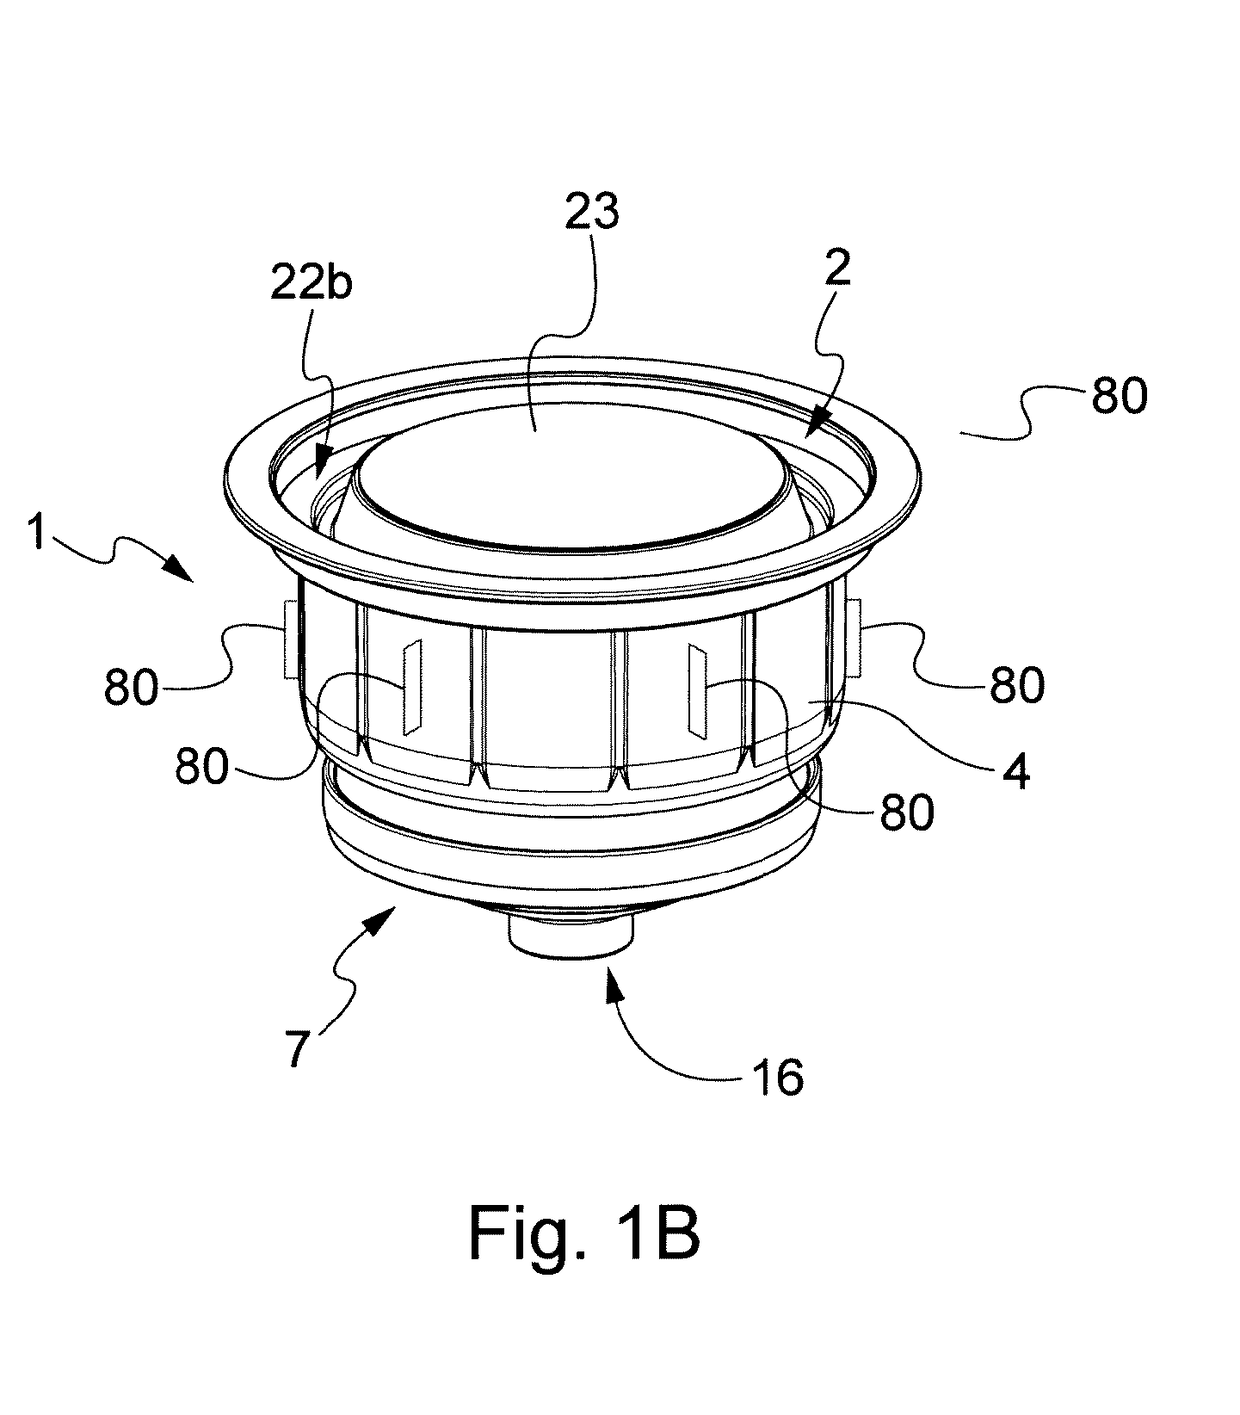 A capsule assembly comprising a capsule and a conveyor cap configured to open said capsule